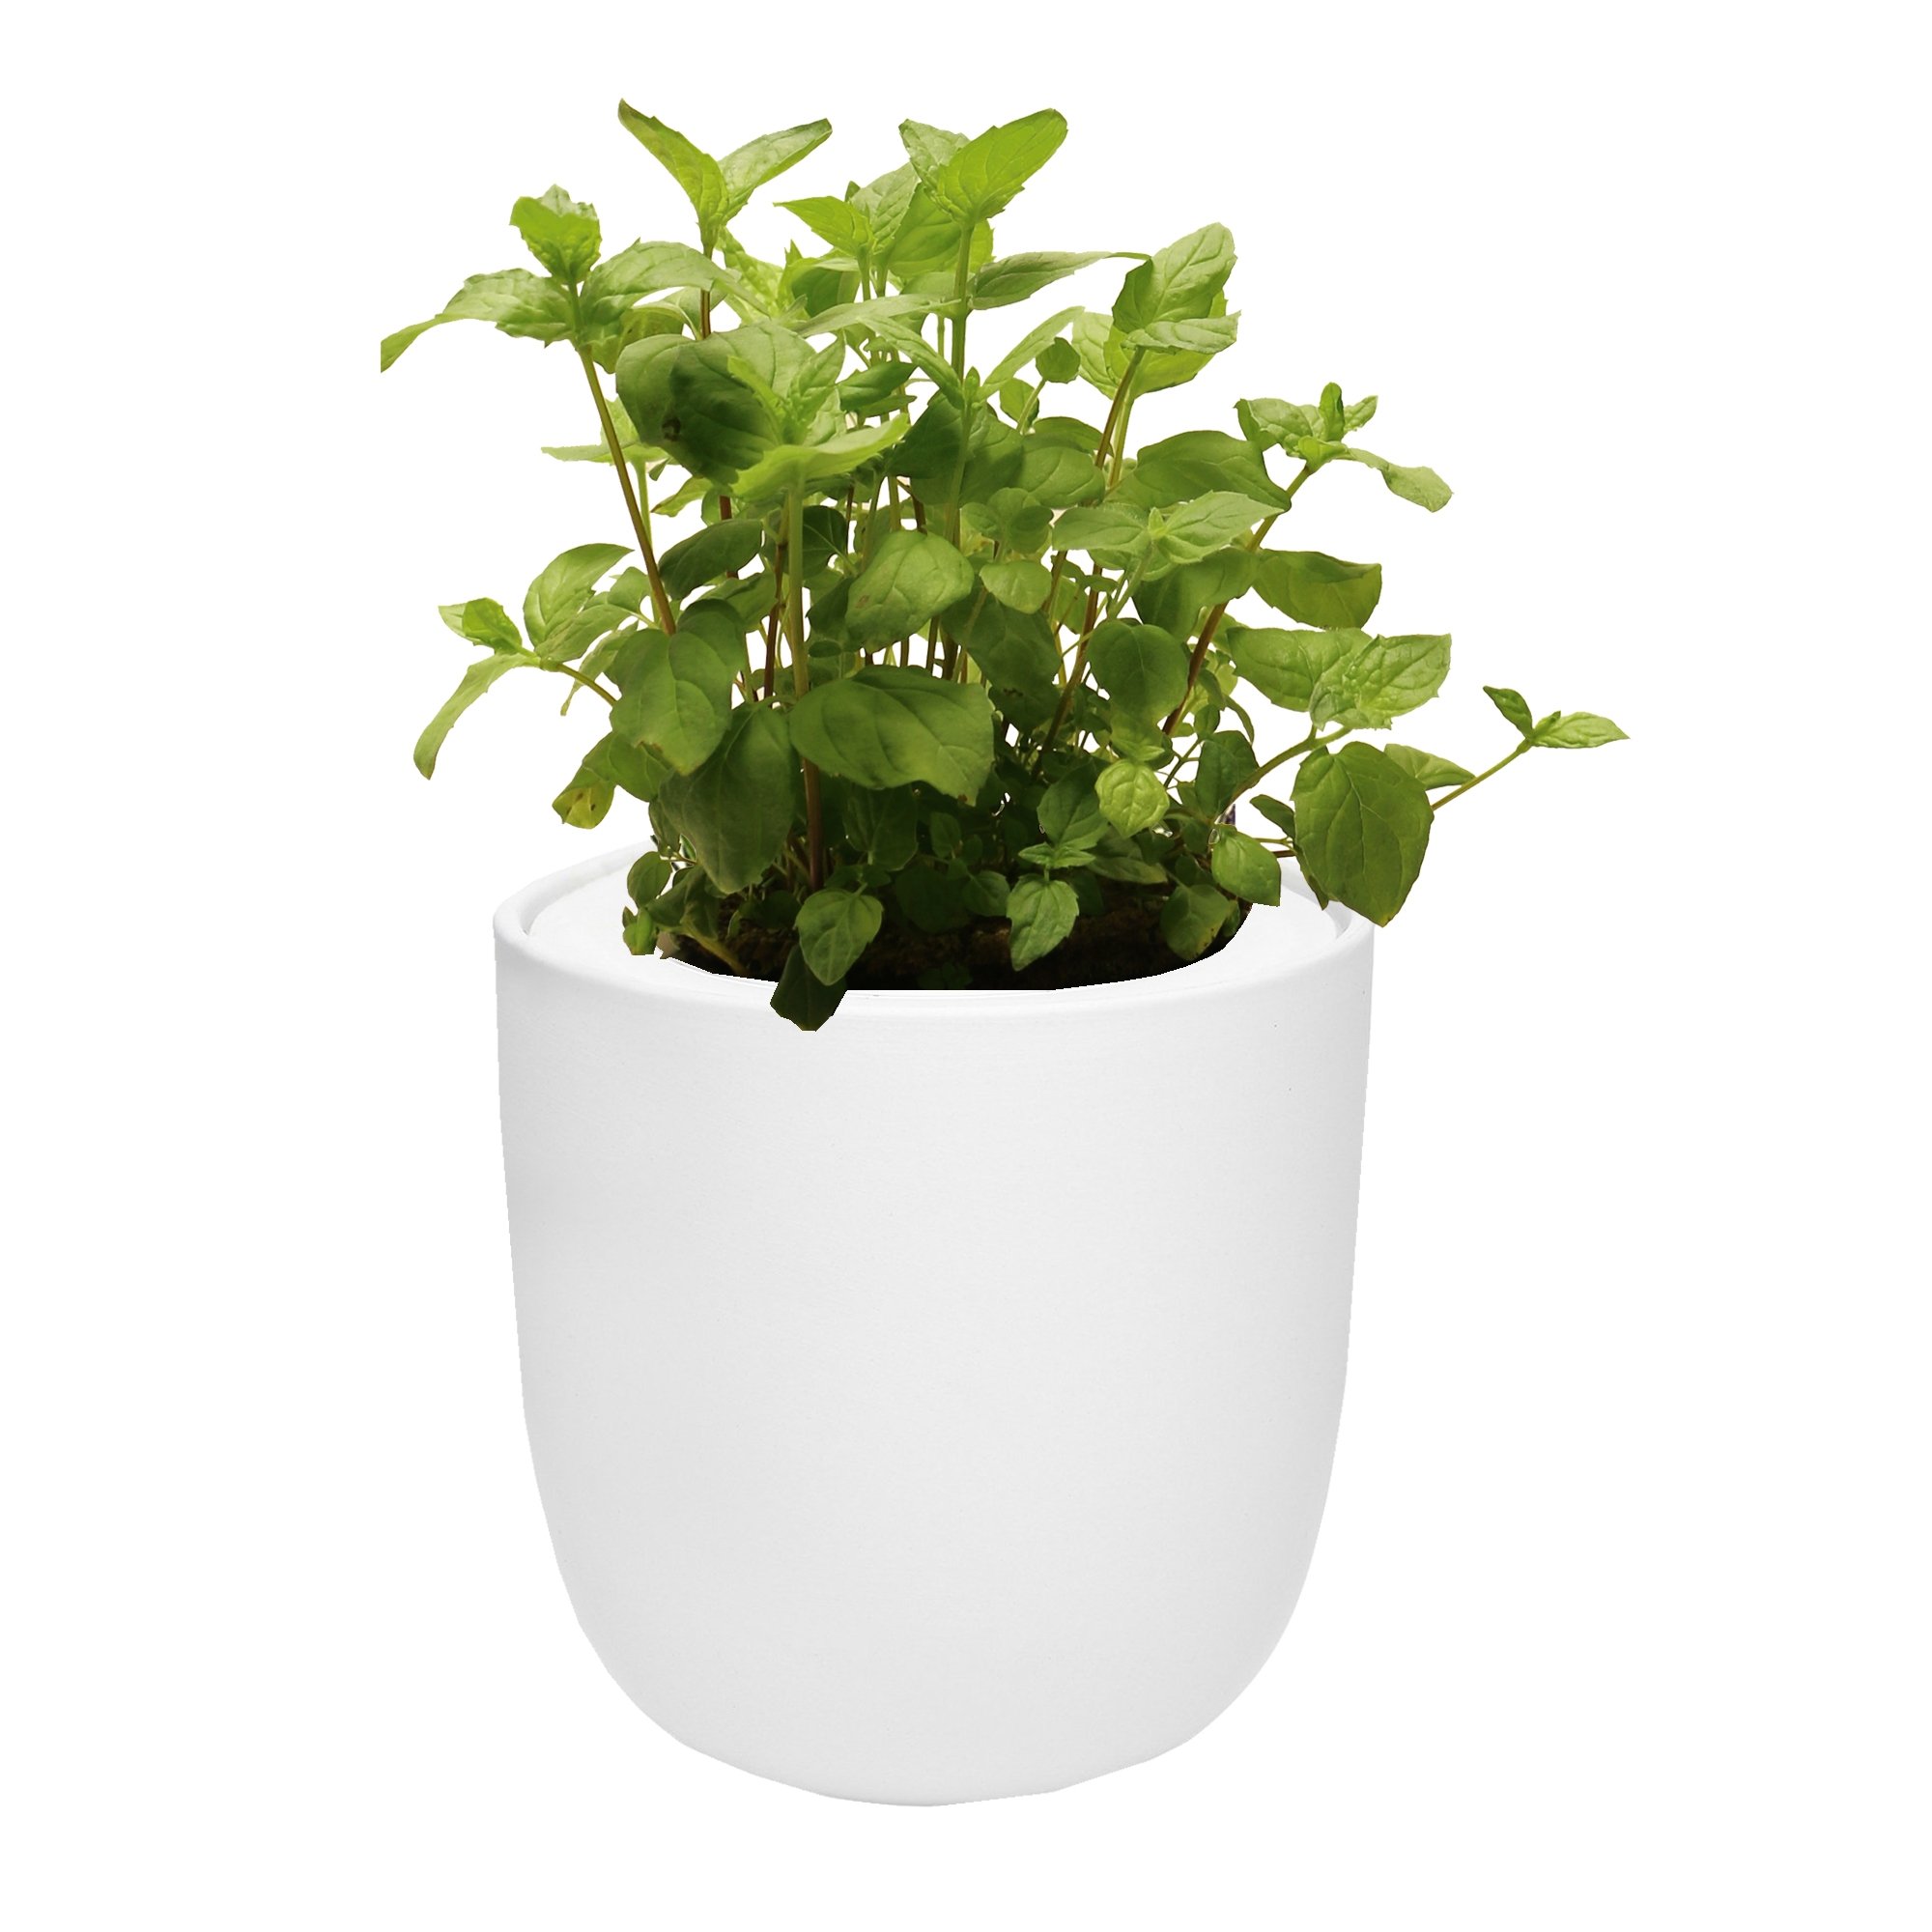 Peppermint White Ceramic Pot Hydroponic Growing Kit with Organic Seeds